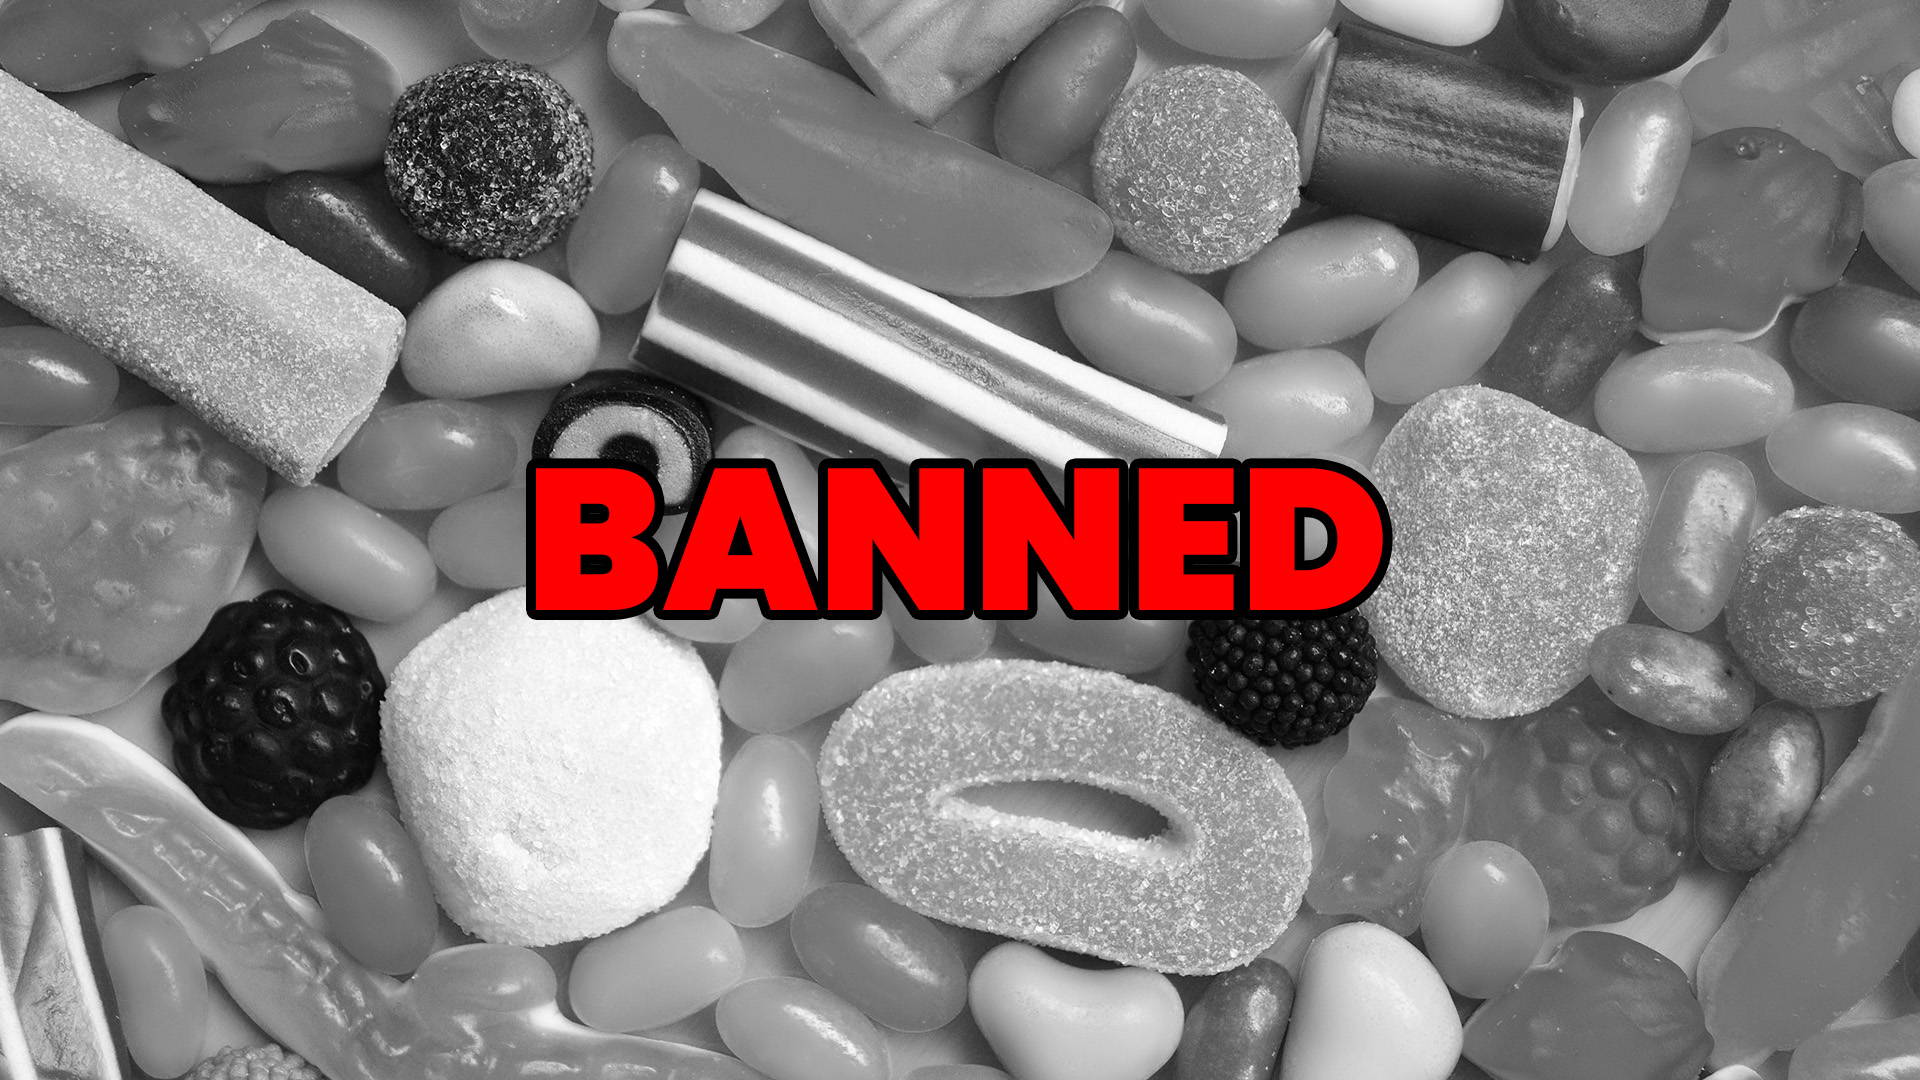 An image of sweet flavours with the word 'banned' written over it.